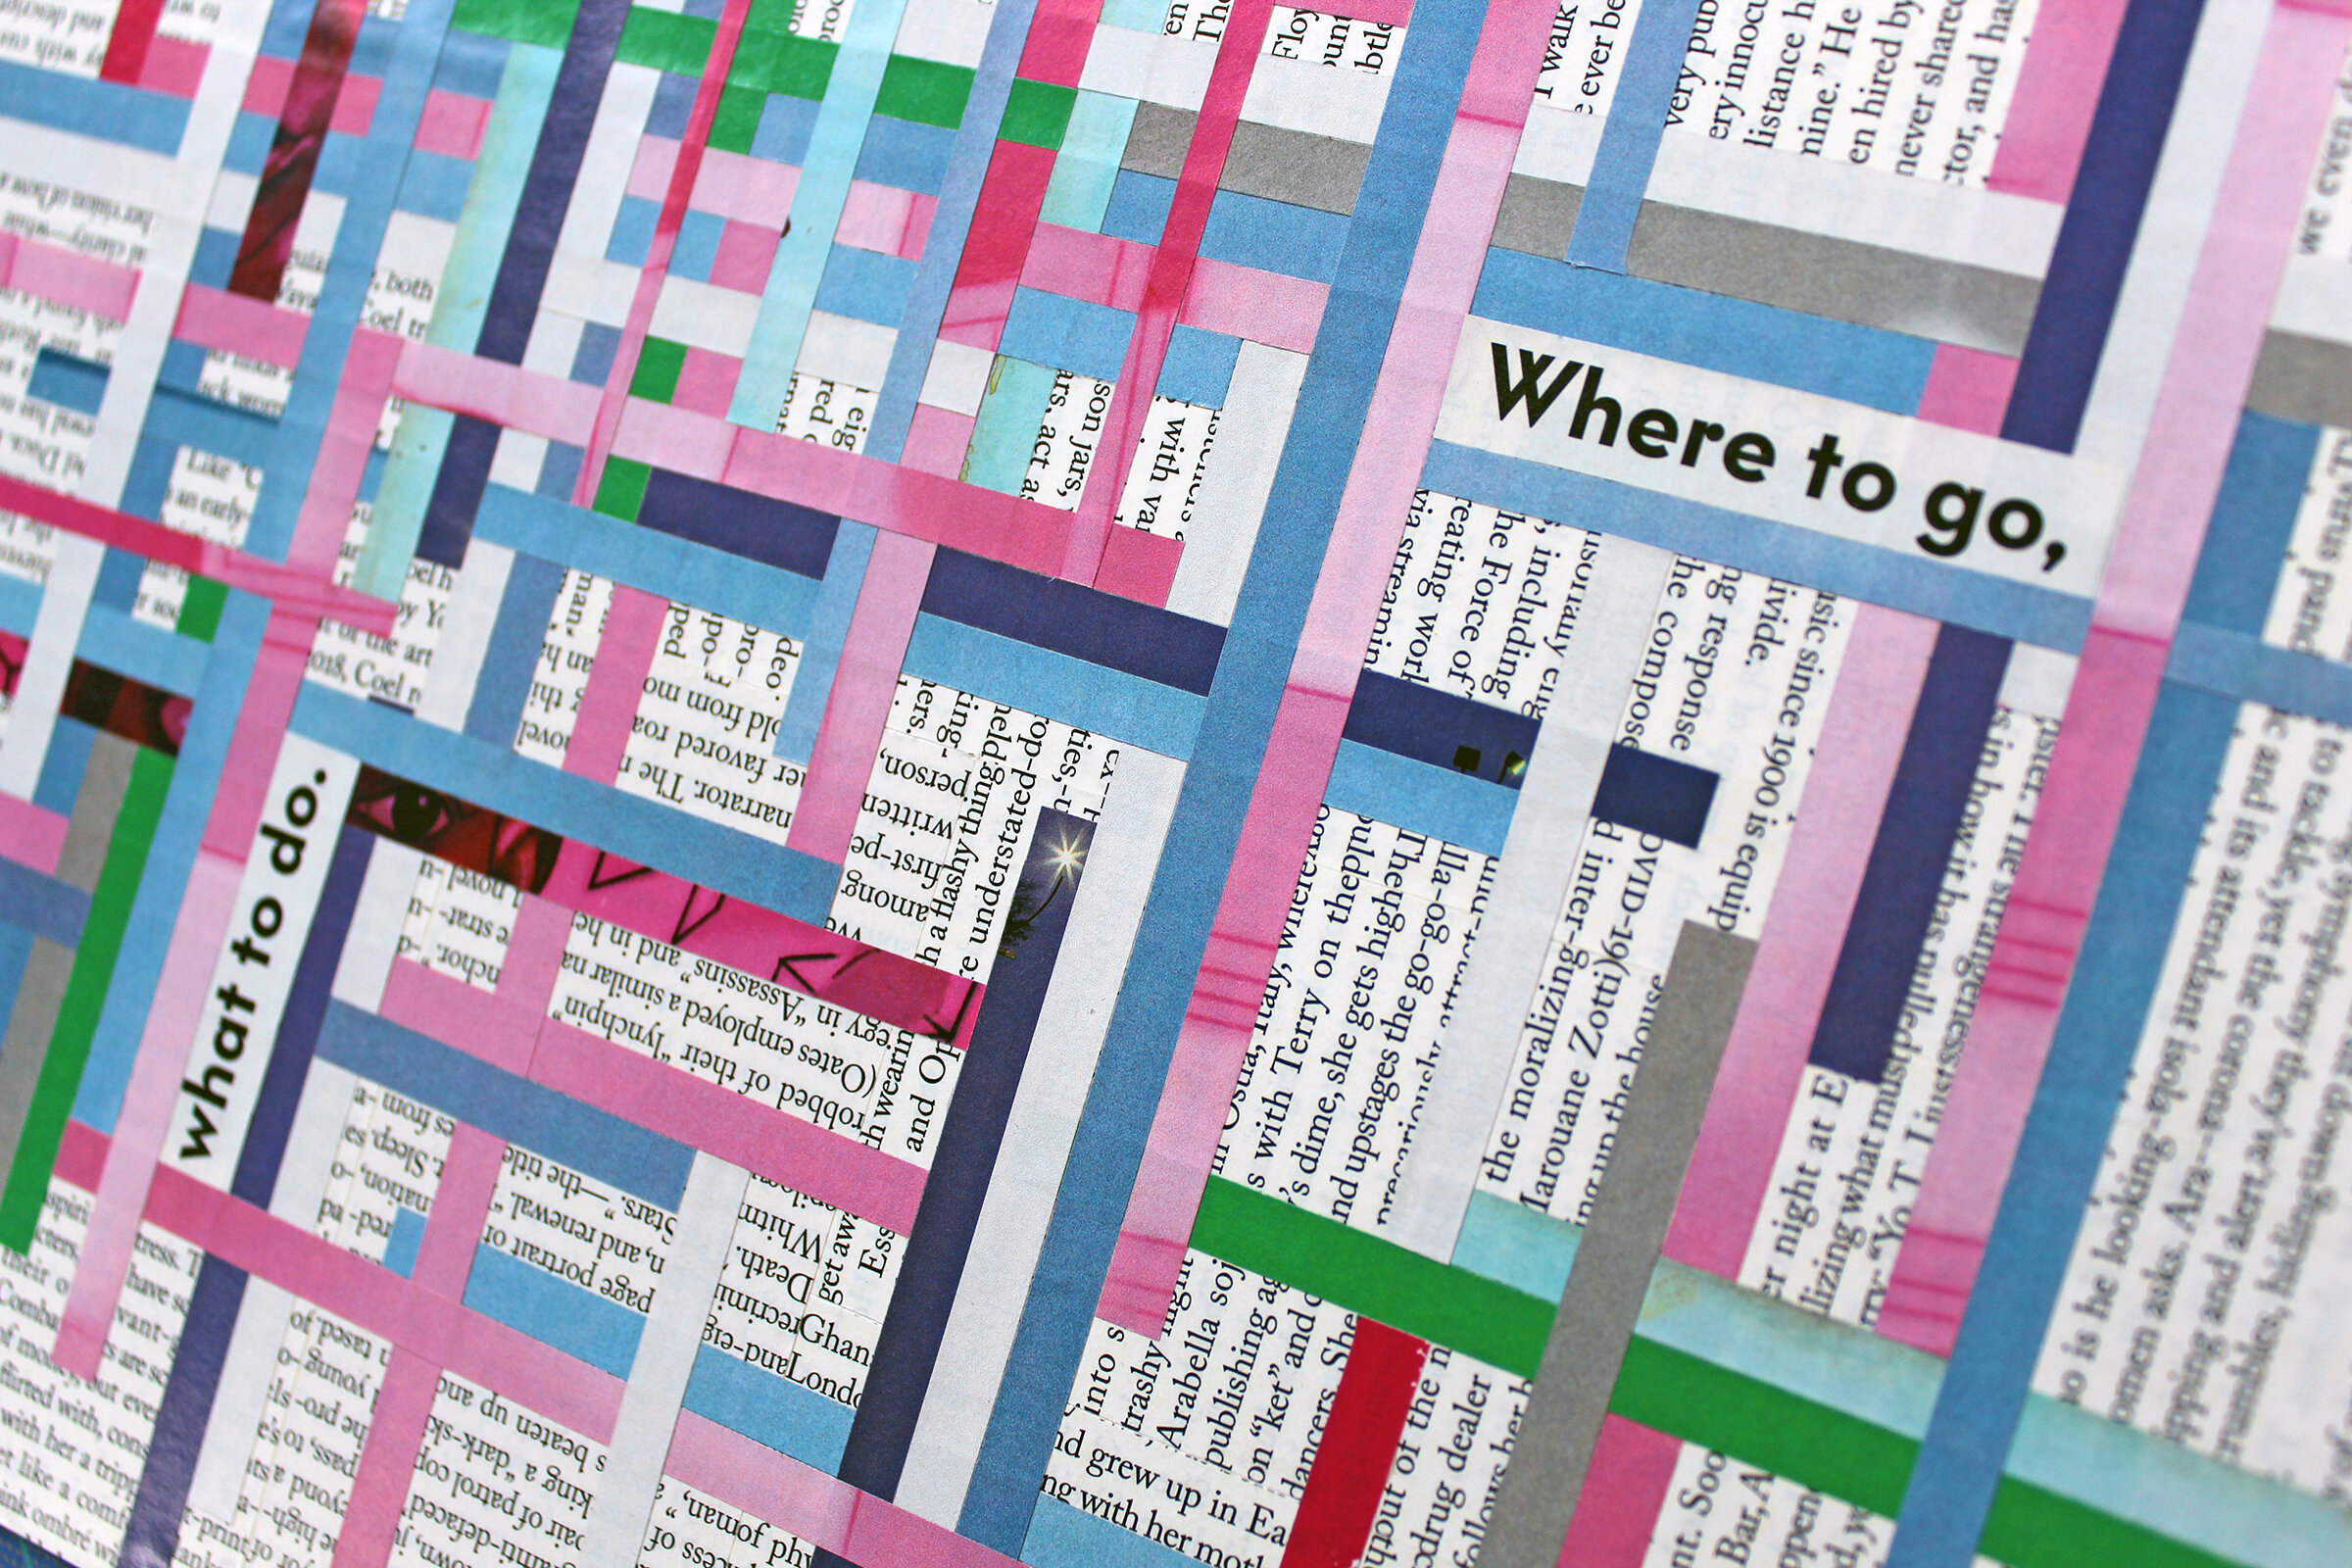  Detail – “Where to go, what to do.” 